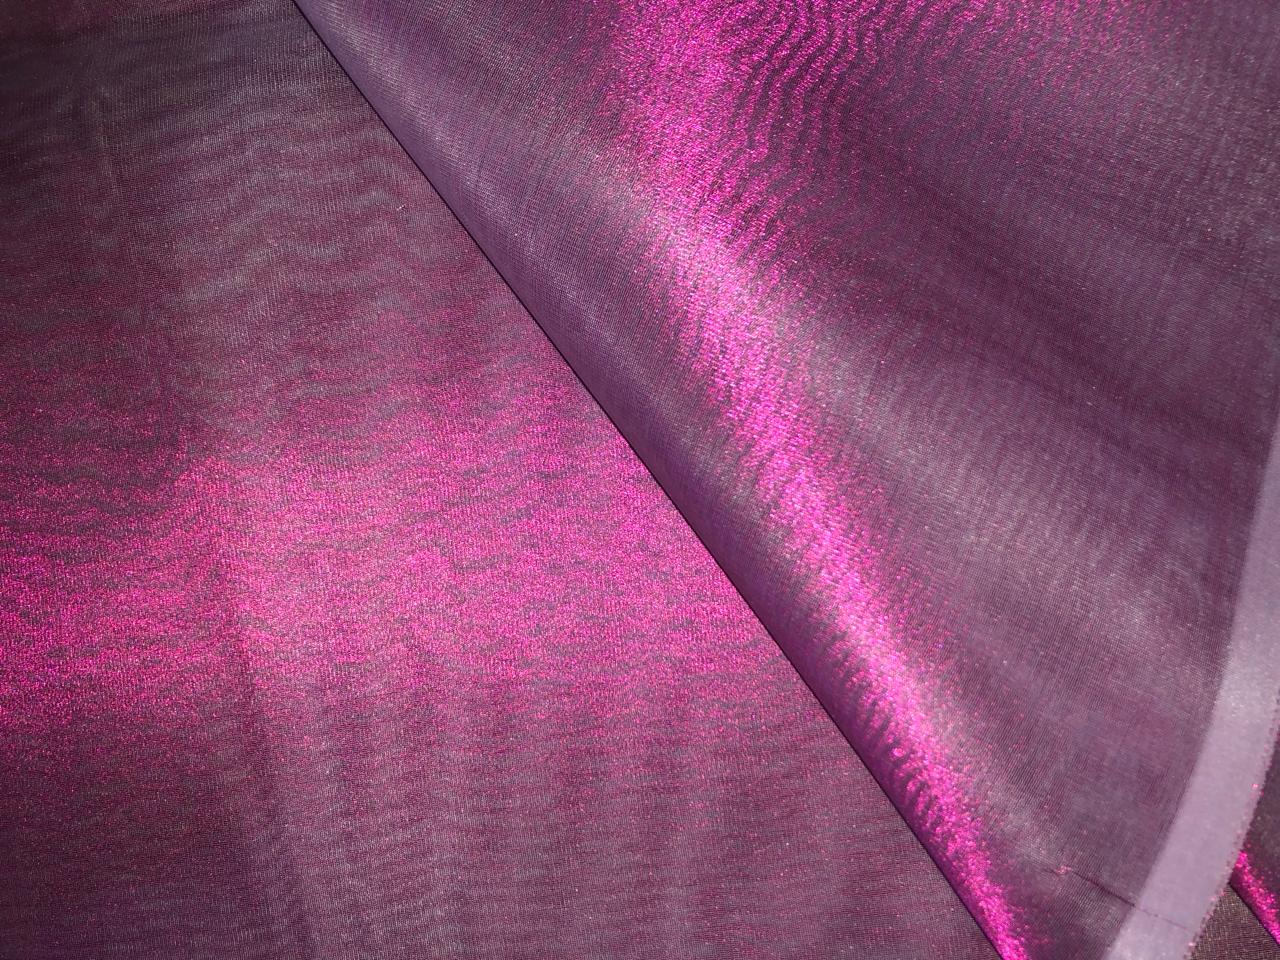 Tissue fabric 44" wide available in 12 colors PURPLE GREEN RUST MAJENTA GOLD SILVER GREY NUDE PINK GREENY GOLD WHITE GOLD GOLD GOLD GOLDEN YELLOW AND  BRONZE